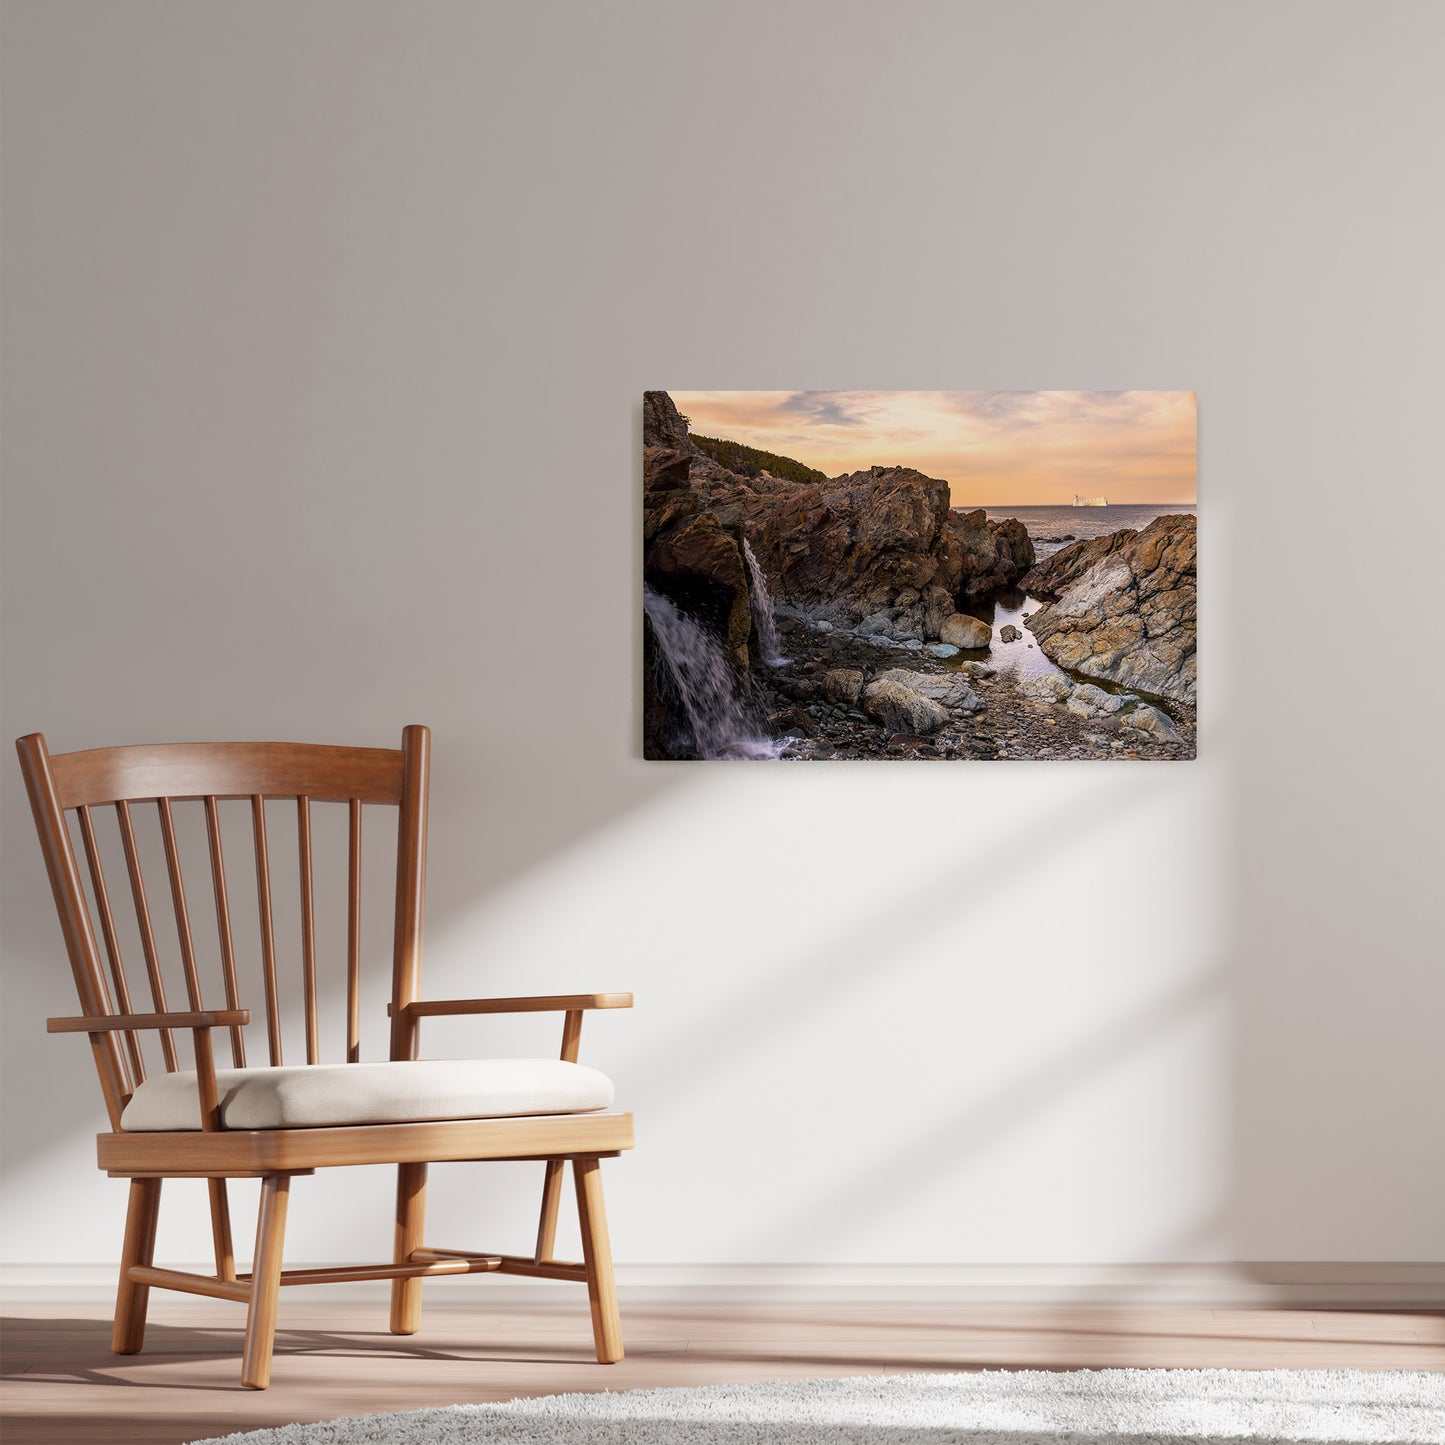 Ray Mackey's Pouch Cove Falls photography reproduced on HD metal print and displayed on wall